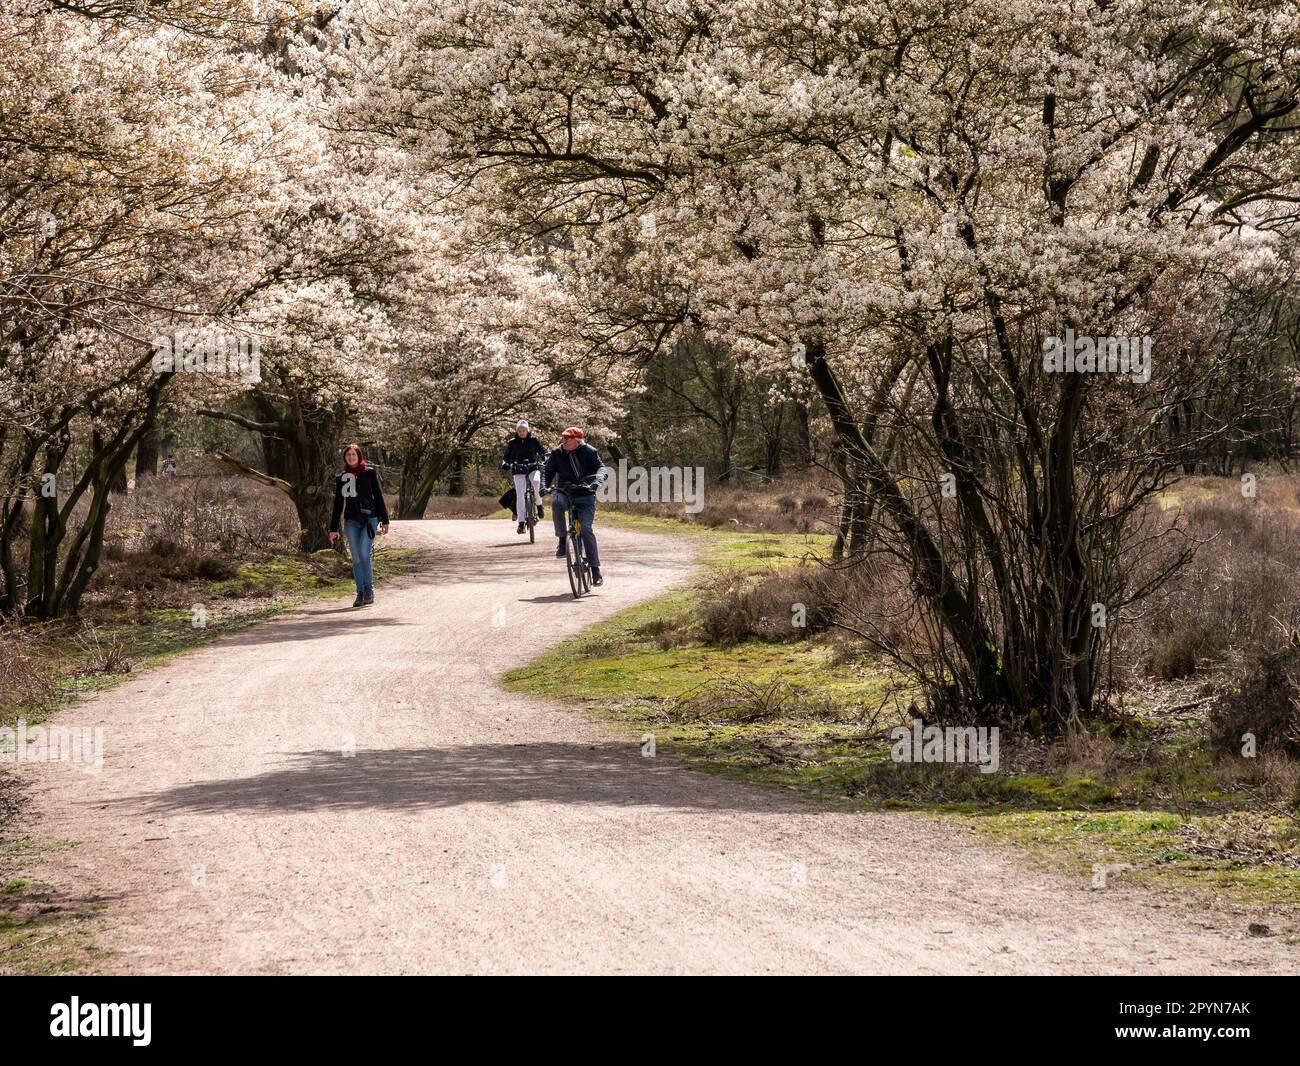 People walking and riding bicycles on cycle path, blooming juneberry trees, Amelanchier lamarkii, in Zuiderheide nature reserve, Het Gooi, Netherlands Stock Photo